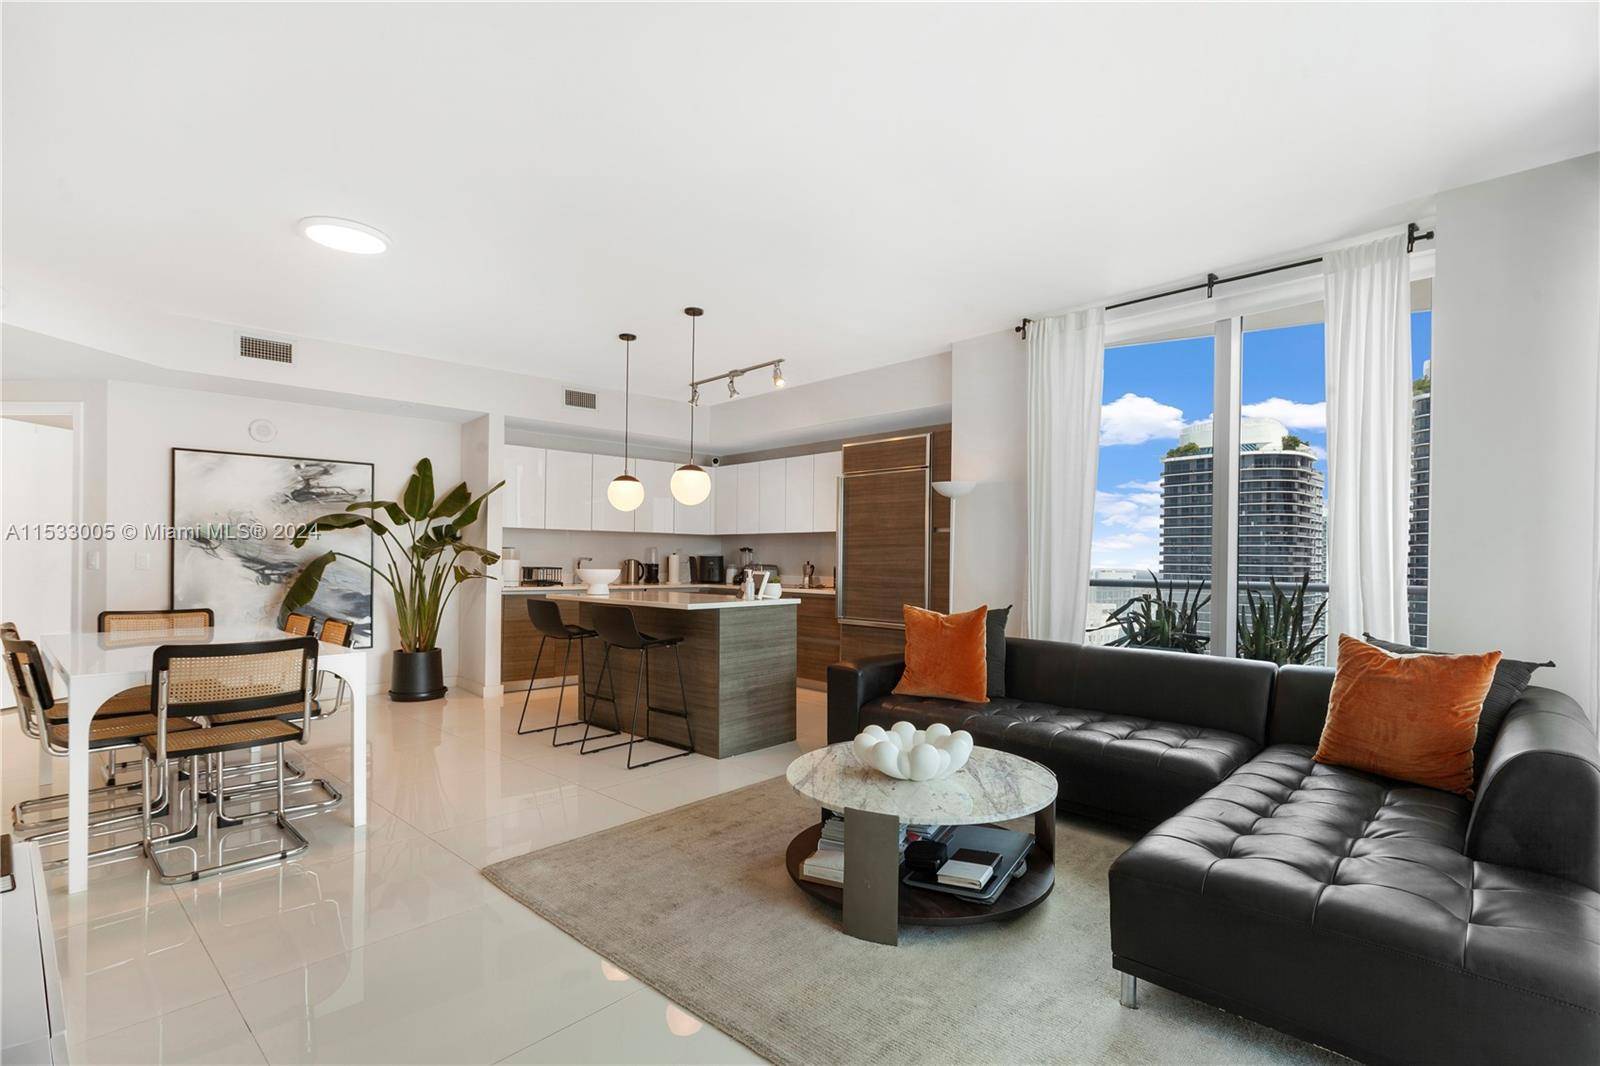 Nestled in Brickell's core, this 38th floor condo at Millecento Residences embodies the essence of luxury.